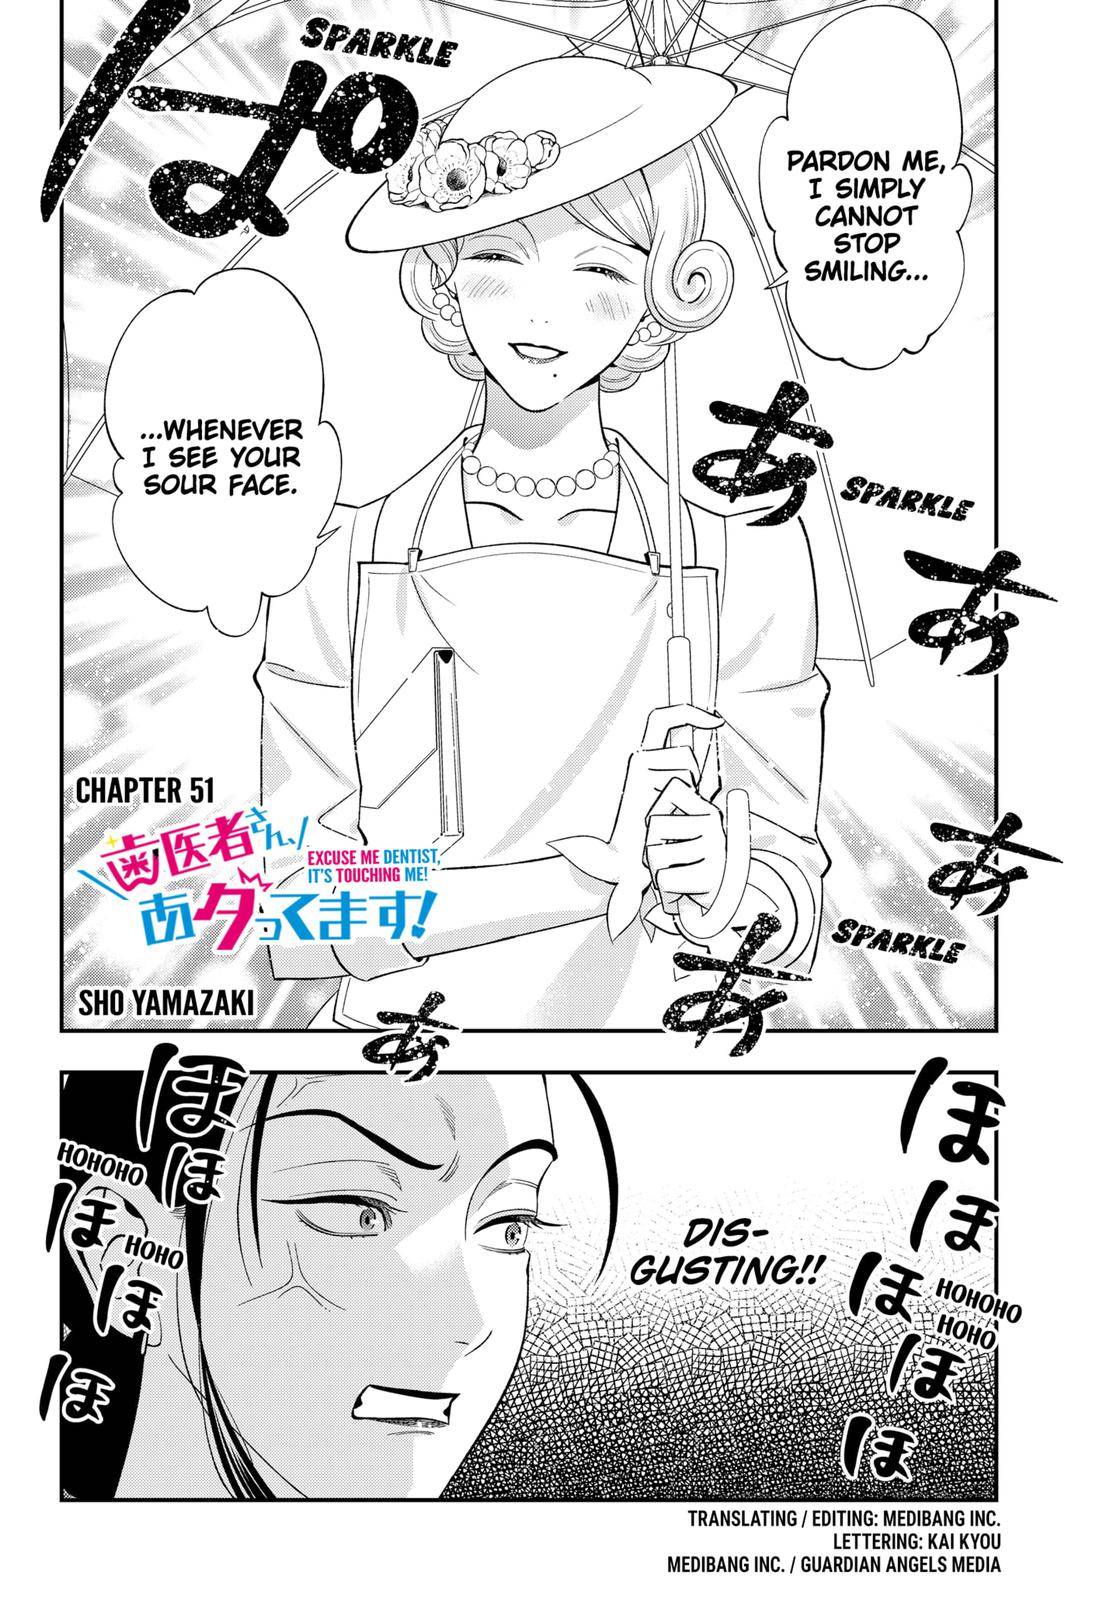 Dentist-San, Your Boobs Are Touching Me! - chapter 51 - #2